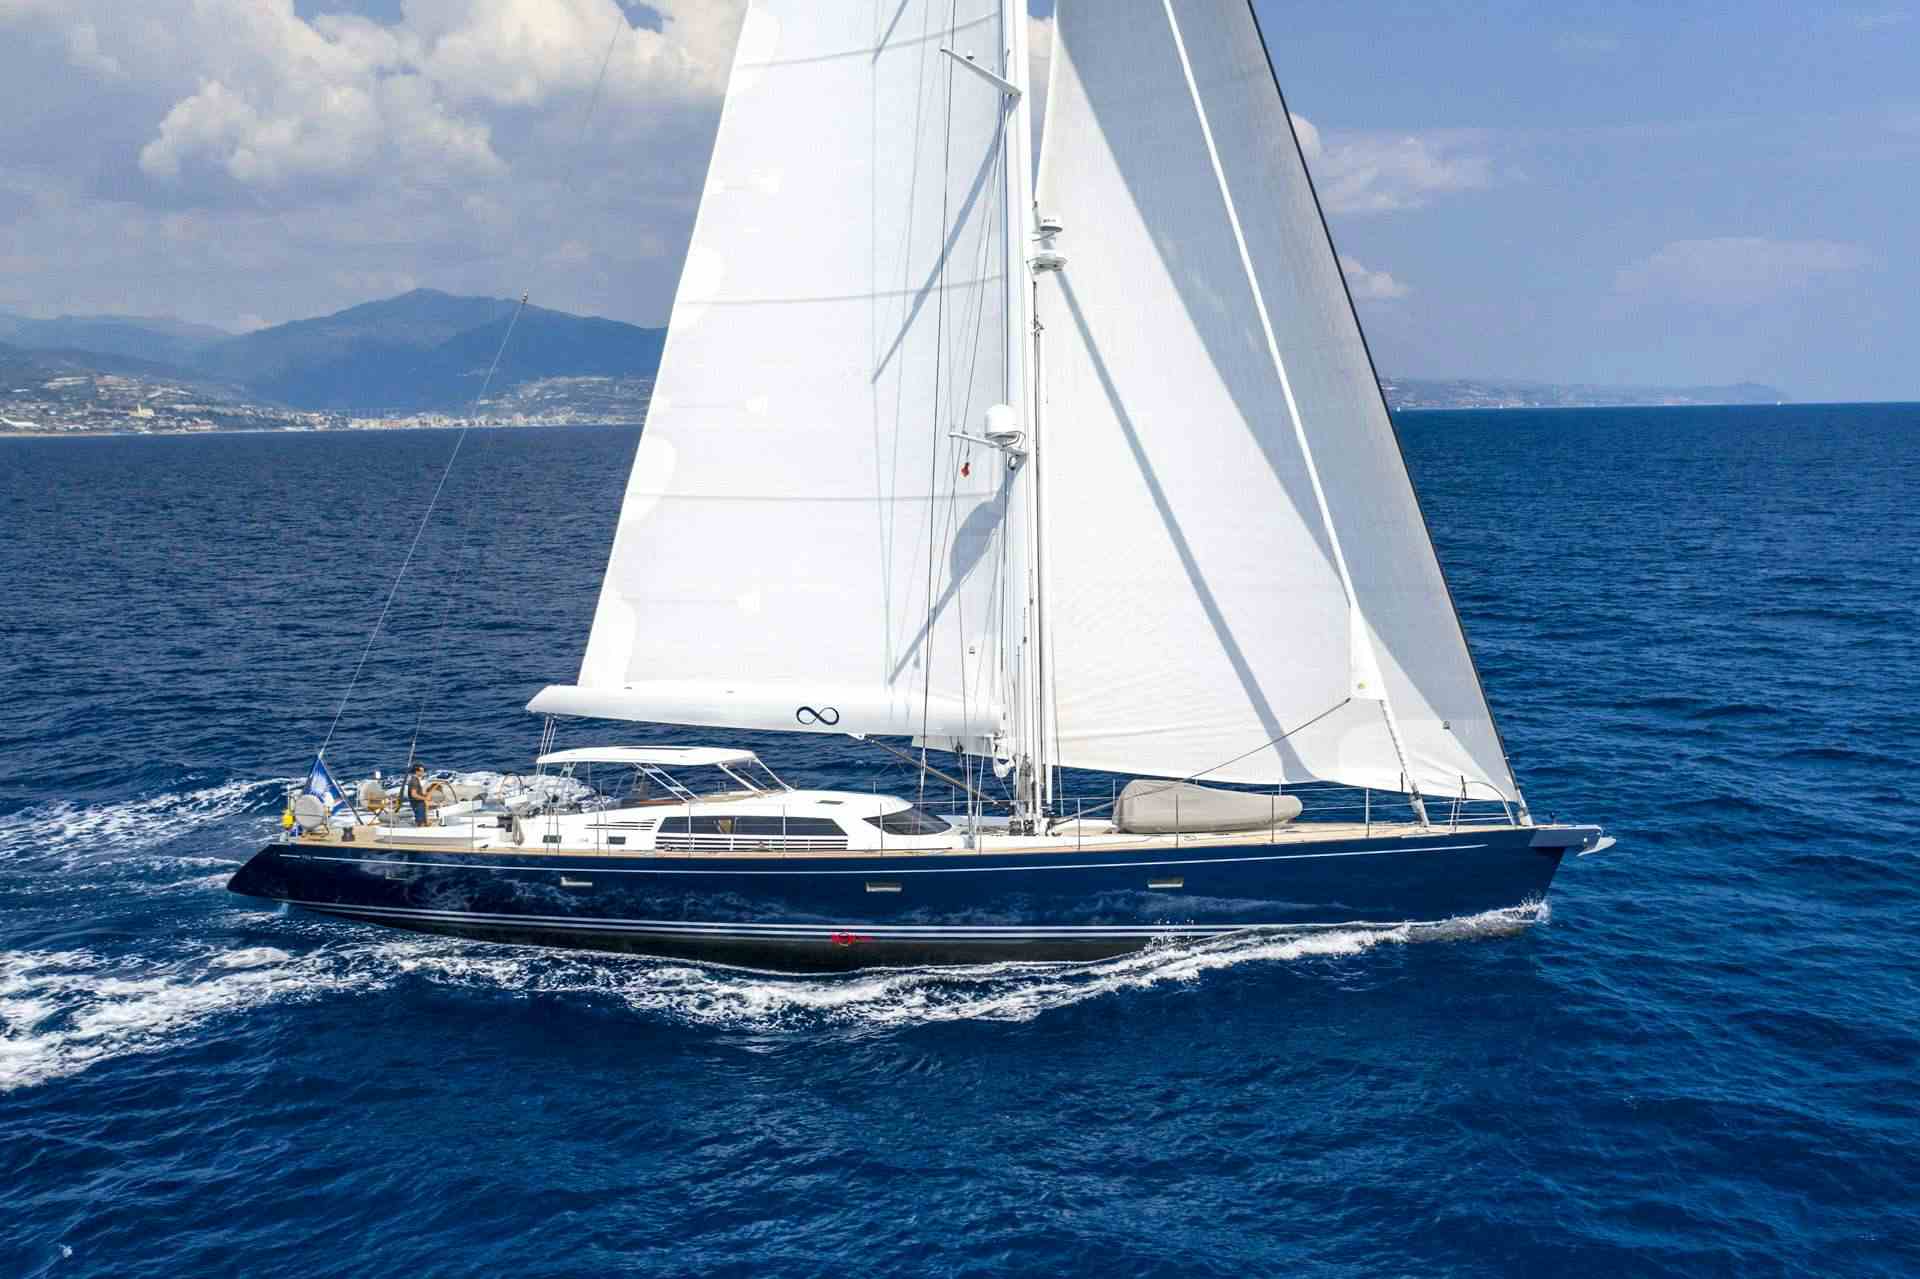 LADY 8 - Sailboat Charter Guadeloupe & Boat hire in W. Med -Naples/Sicily, W. Med -Riviera/Cors/Sard., Caribbean Leewards, Caribbean Windwards, Turkey, W. Med - Spain/Balearics, Caribbean Leewards, Caribbean Windwards 1